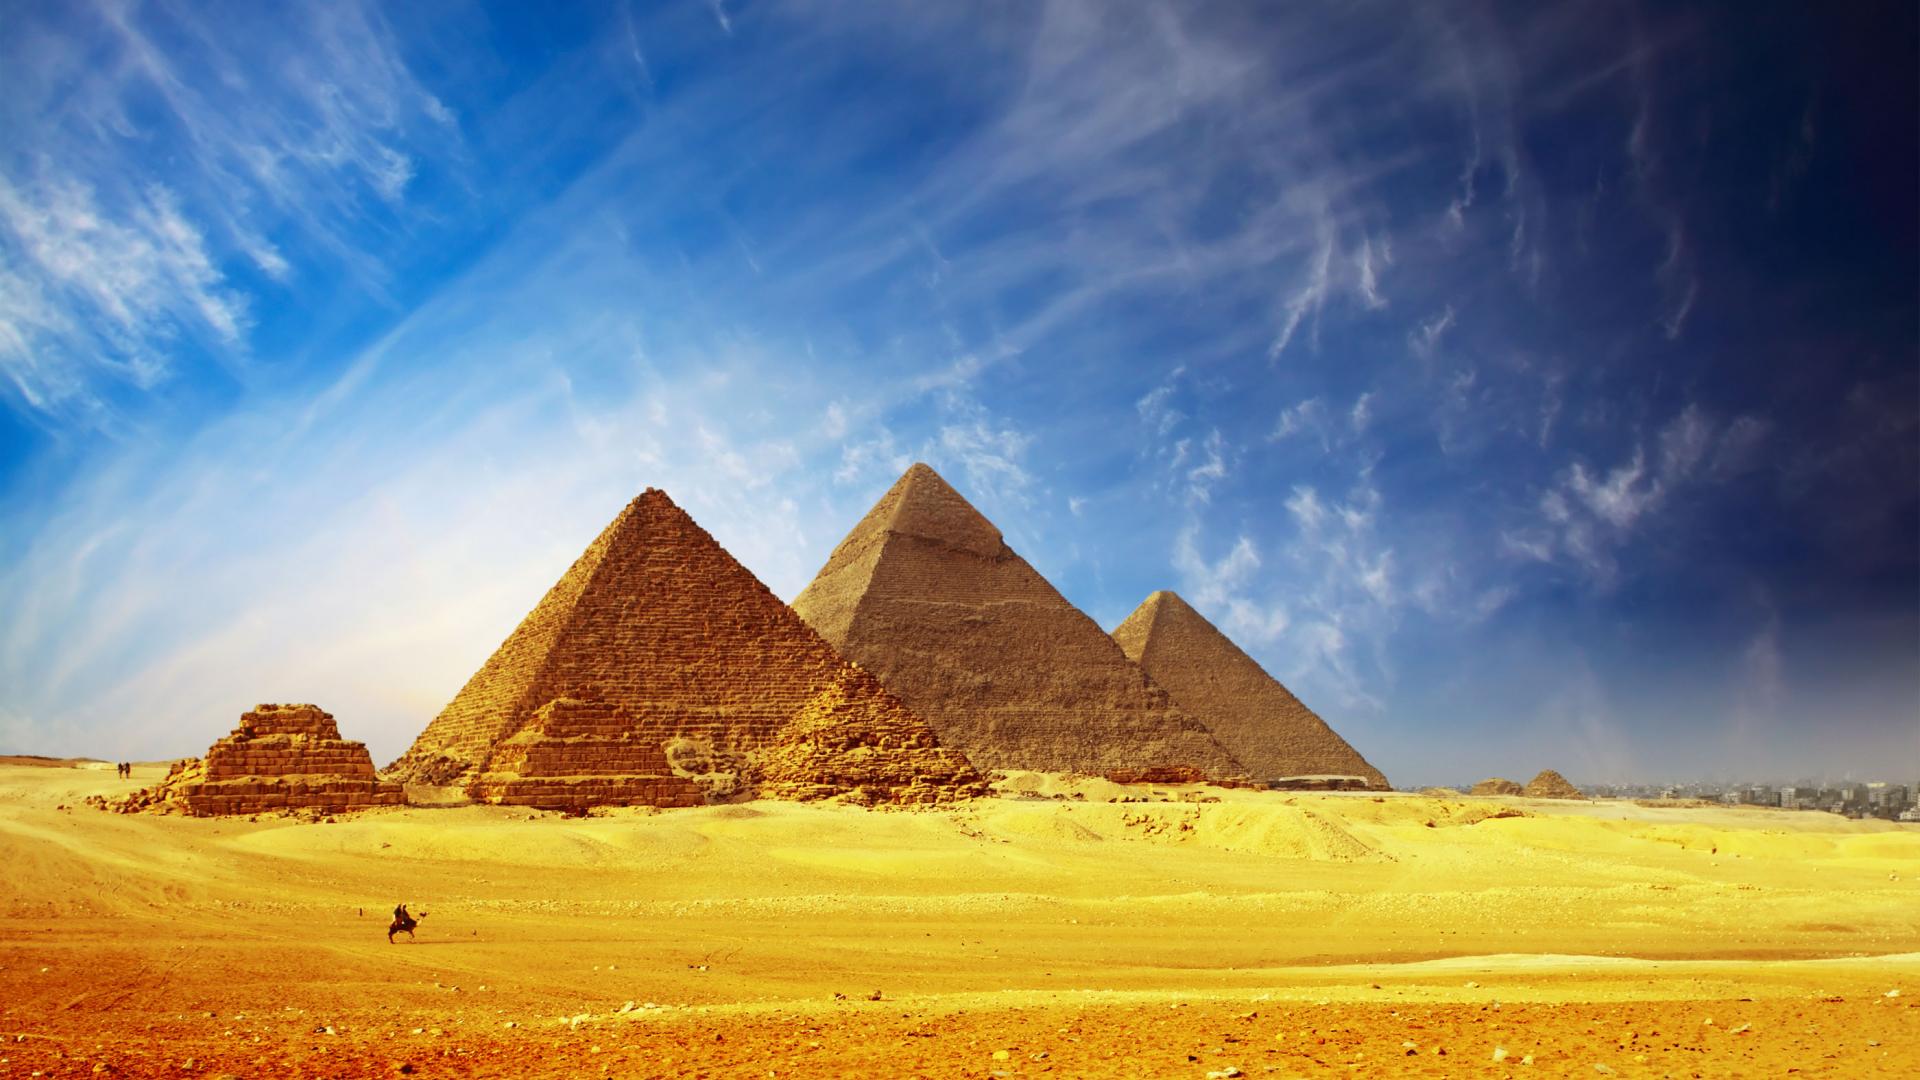 🔥 Download The Egyptian Pyramids HD Wallpaper by @melissaking ...